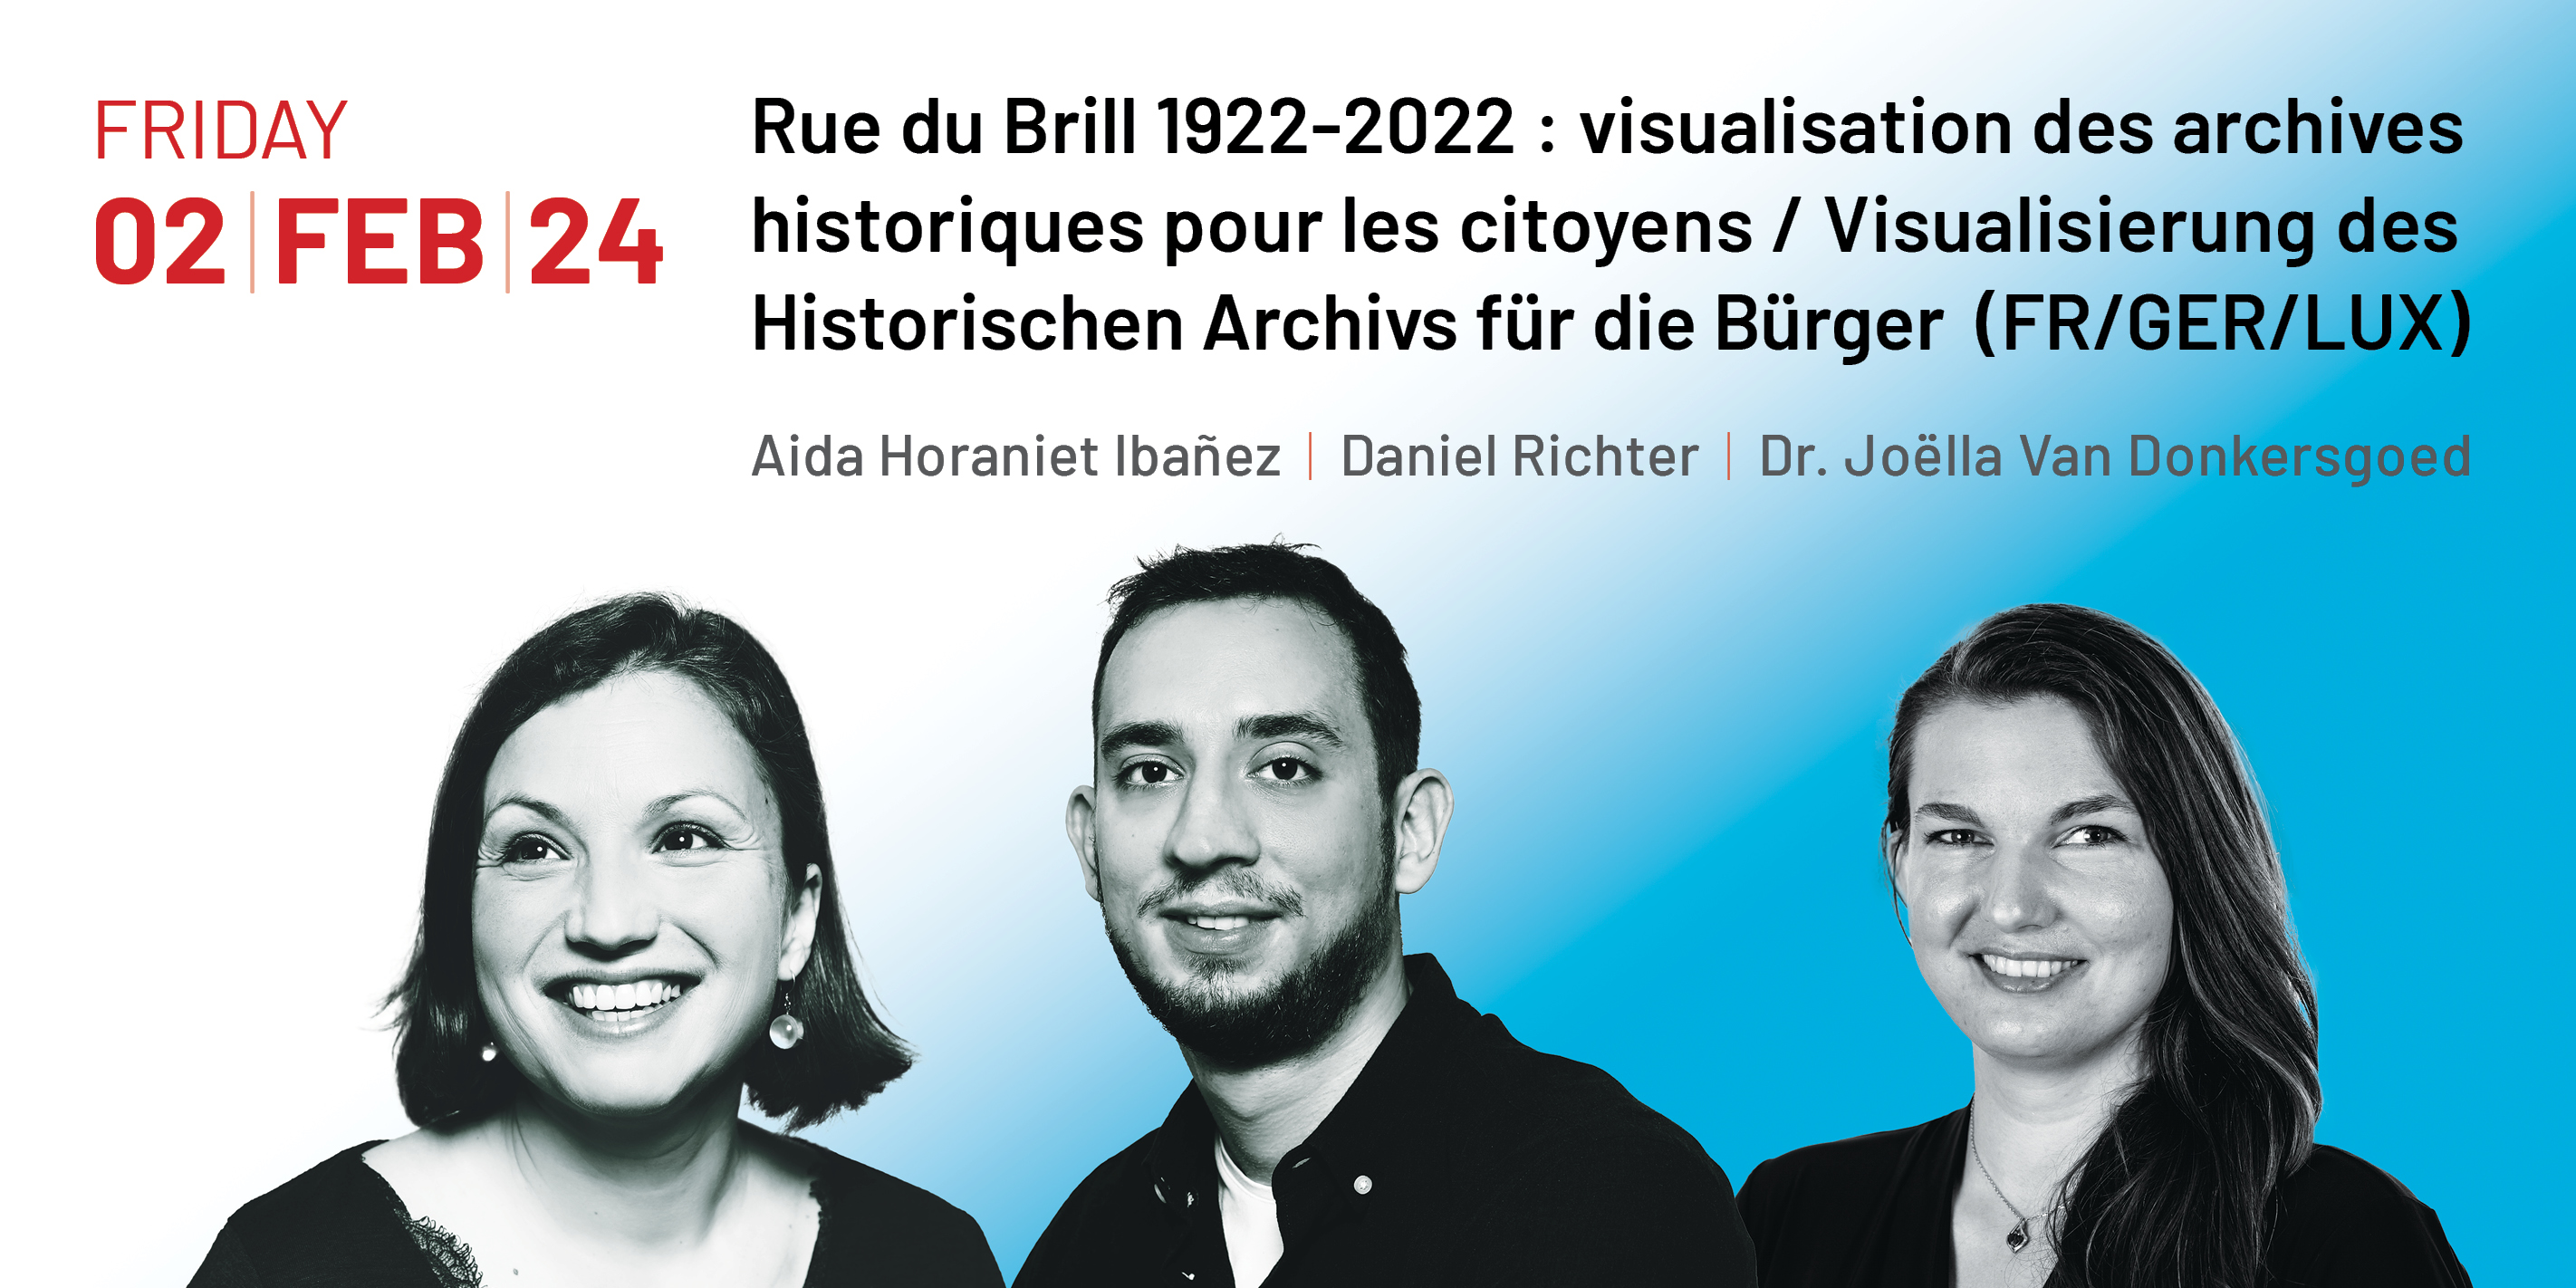 visualization of historical archives for citizens